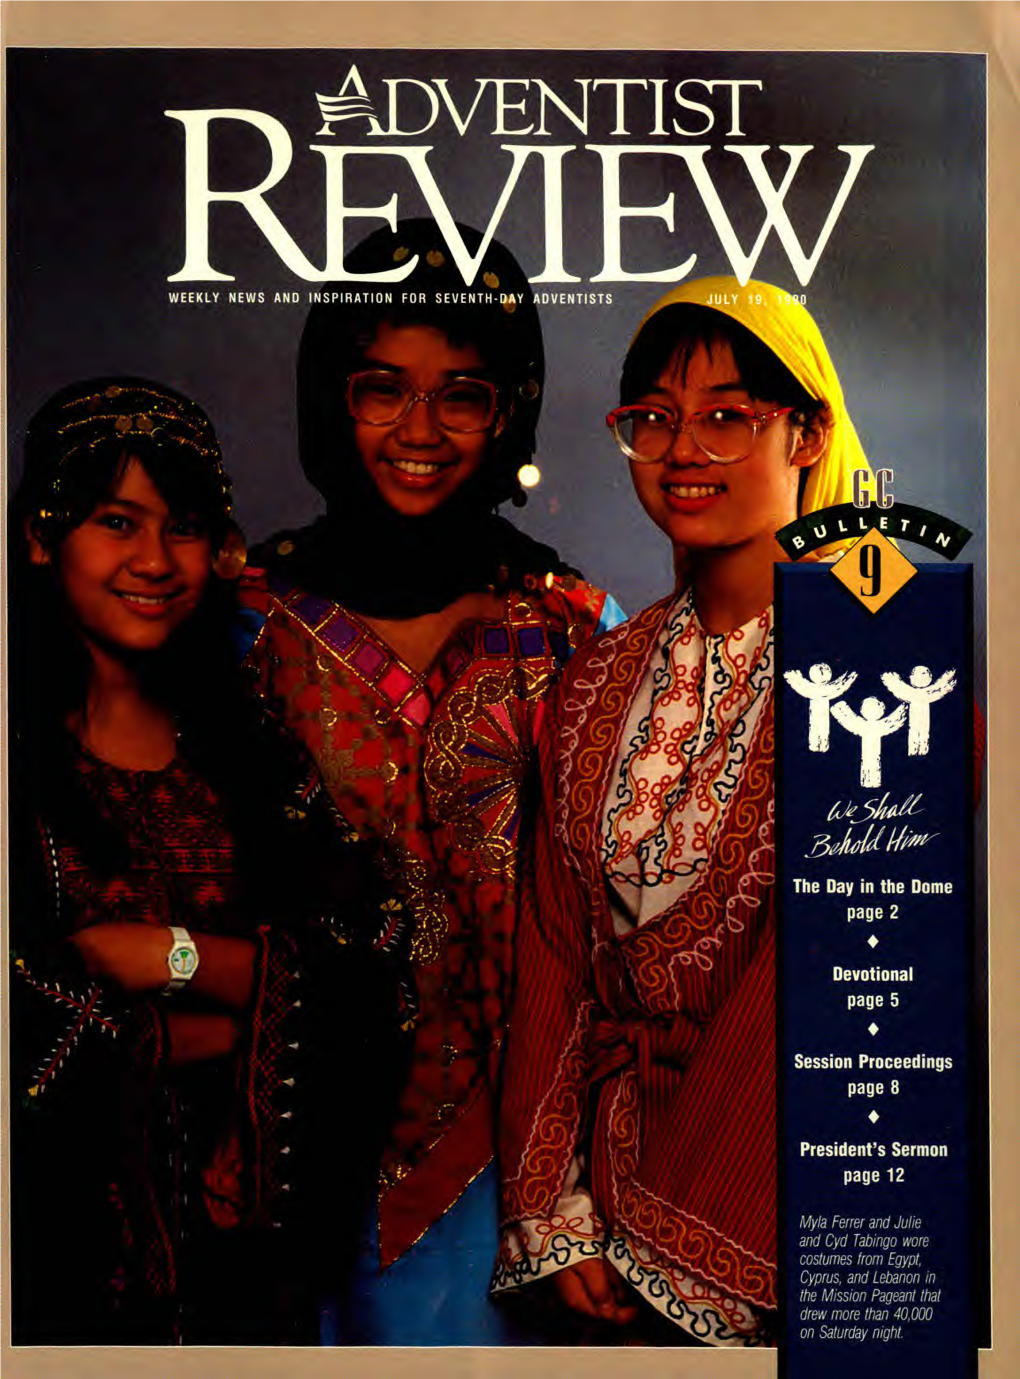 ADVENTIST REVIEW, JULY 19, 1990 Here," Robinson Said